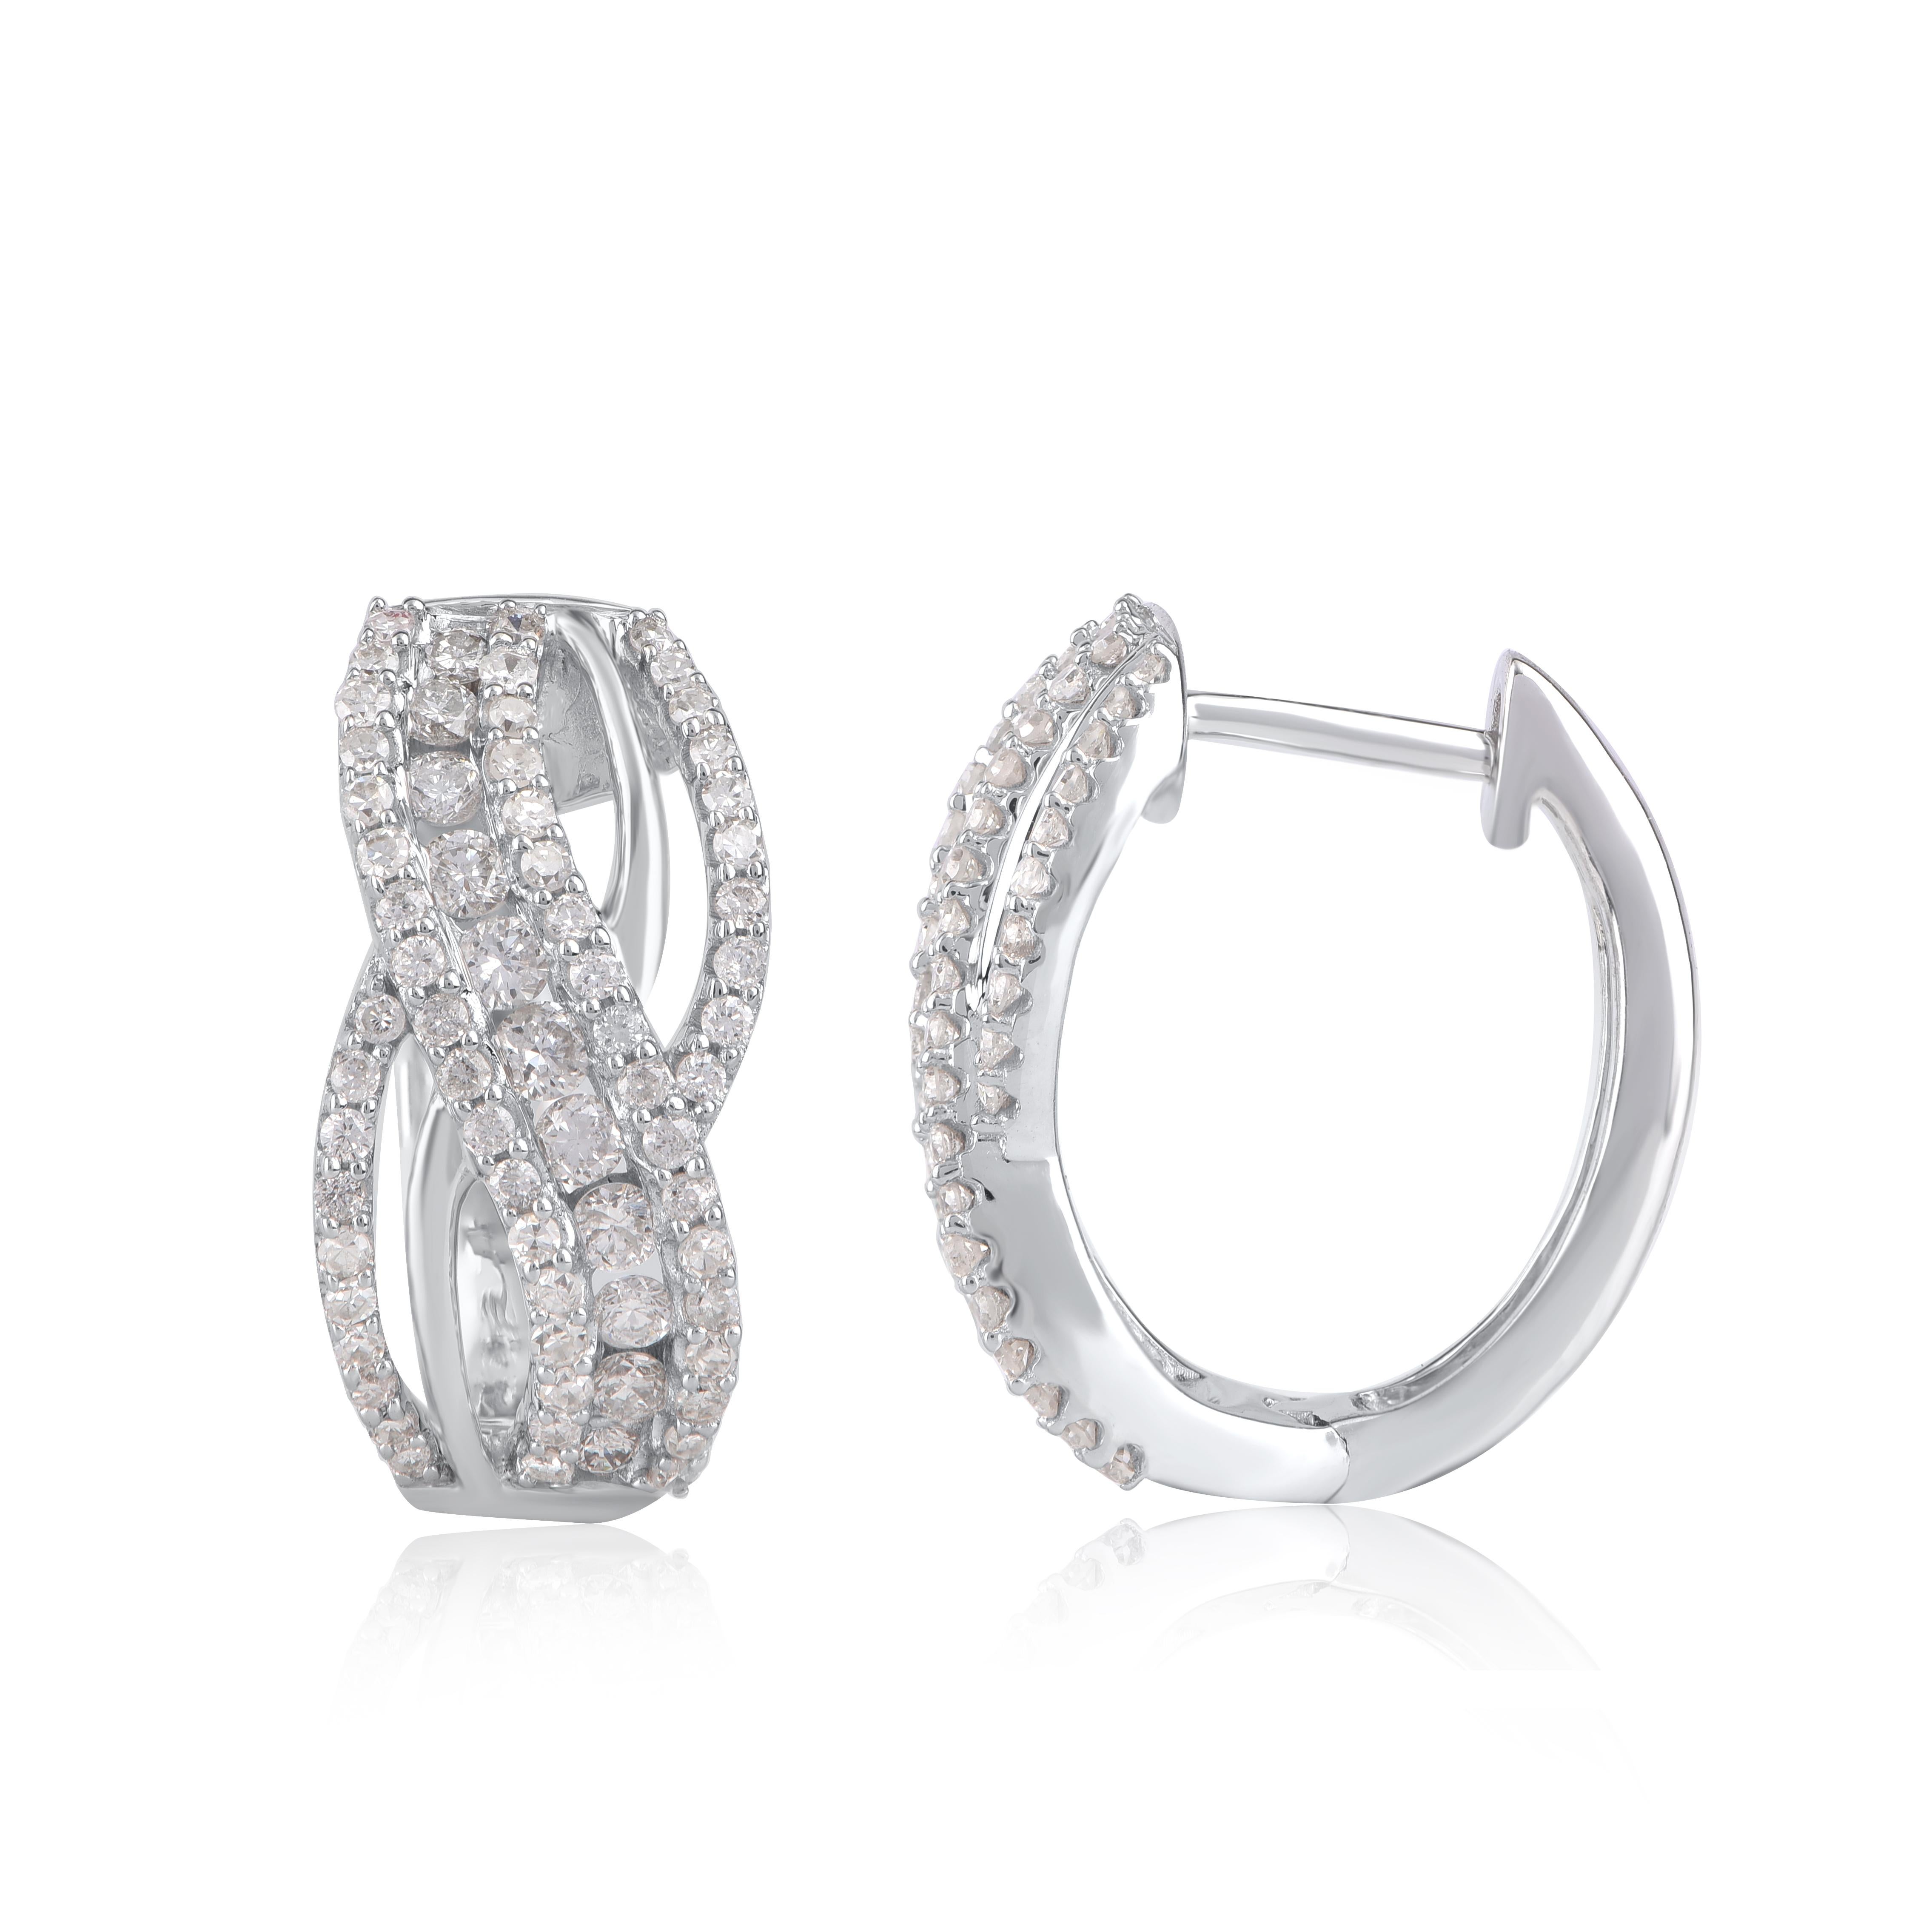 Bring charm to your look with this diamond hoop earrings. This earring is beautifully designed and studded with 134 single cut diamond and brilliant cut diamonds in prong and channel setting. We only use natural, 100% conflict free diamonds which